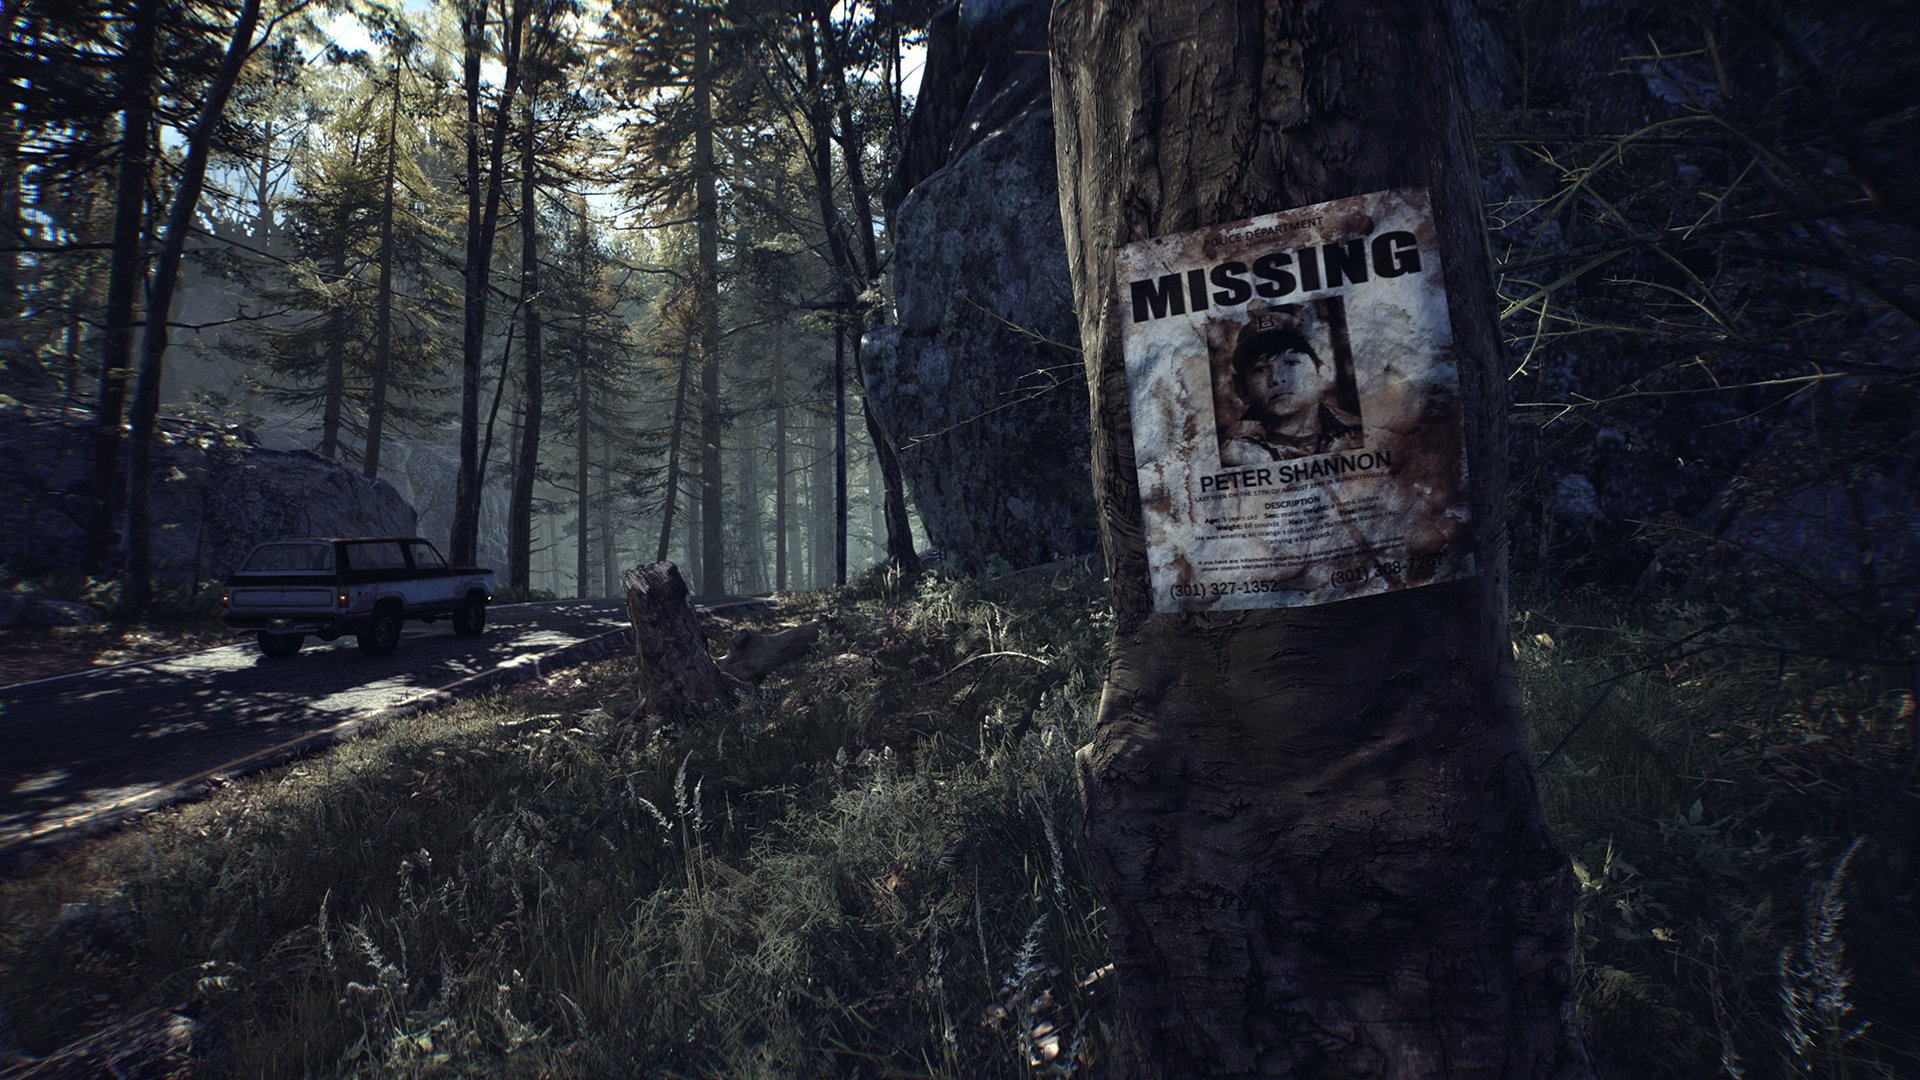 Blair Witch Game on X: "Blair Witch Fact: Nine-year-old Peter Shannon has  vanished into thin air and all clues to the mystery point to the ominous Black  Hills Forest. Ellis sets out